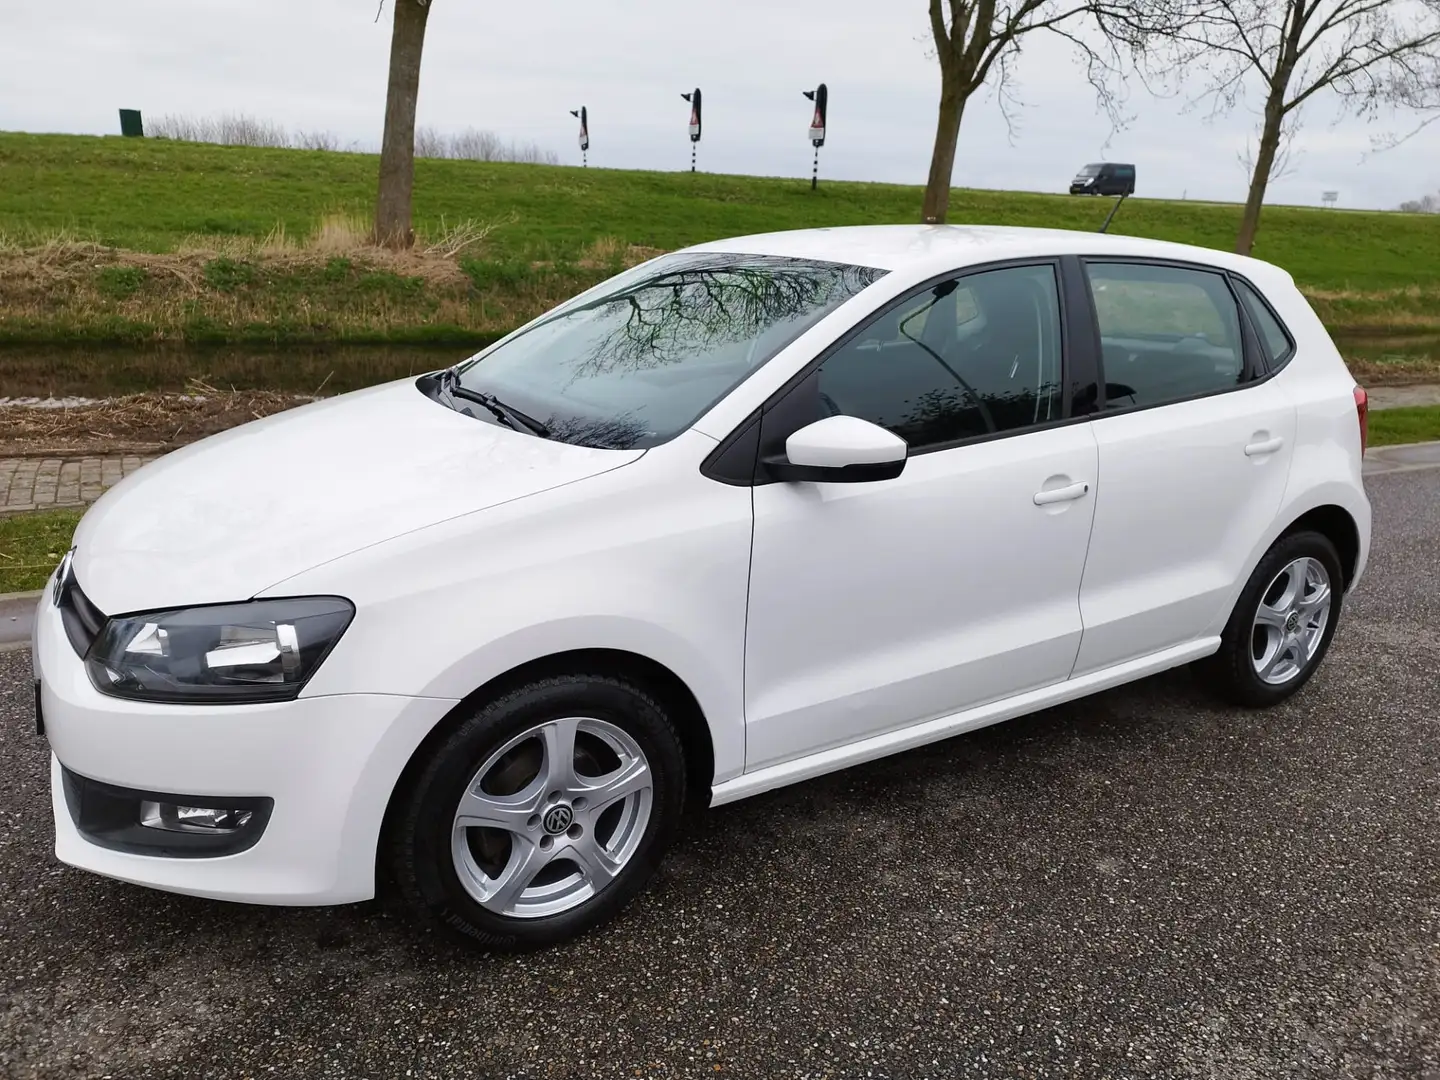 Volkswagen Polo 1.2-12V ** 5 DRS ** 138.528 km ** Airco ** Stoelve Weiß - 2